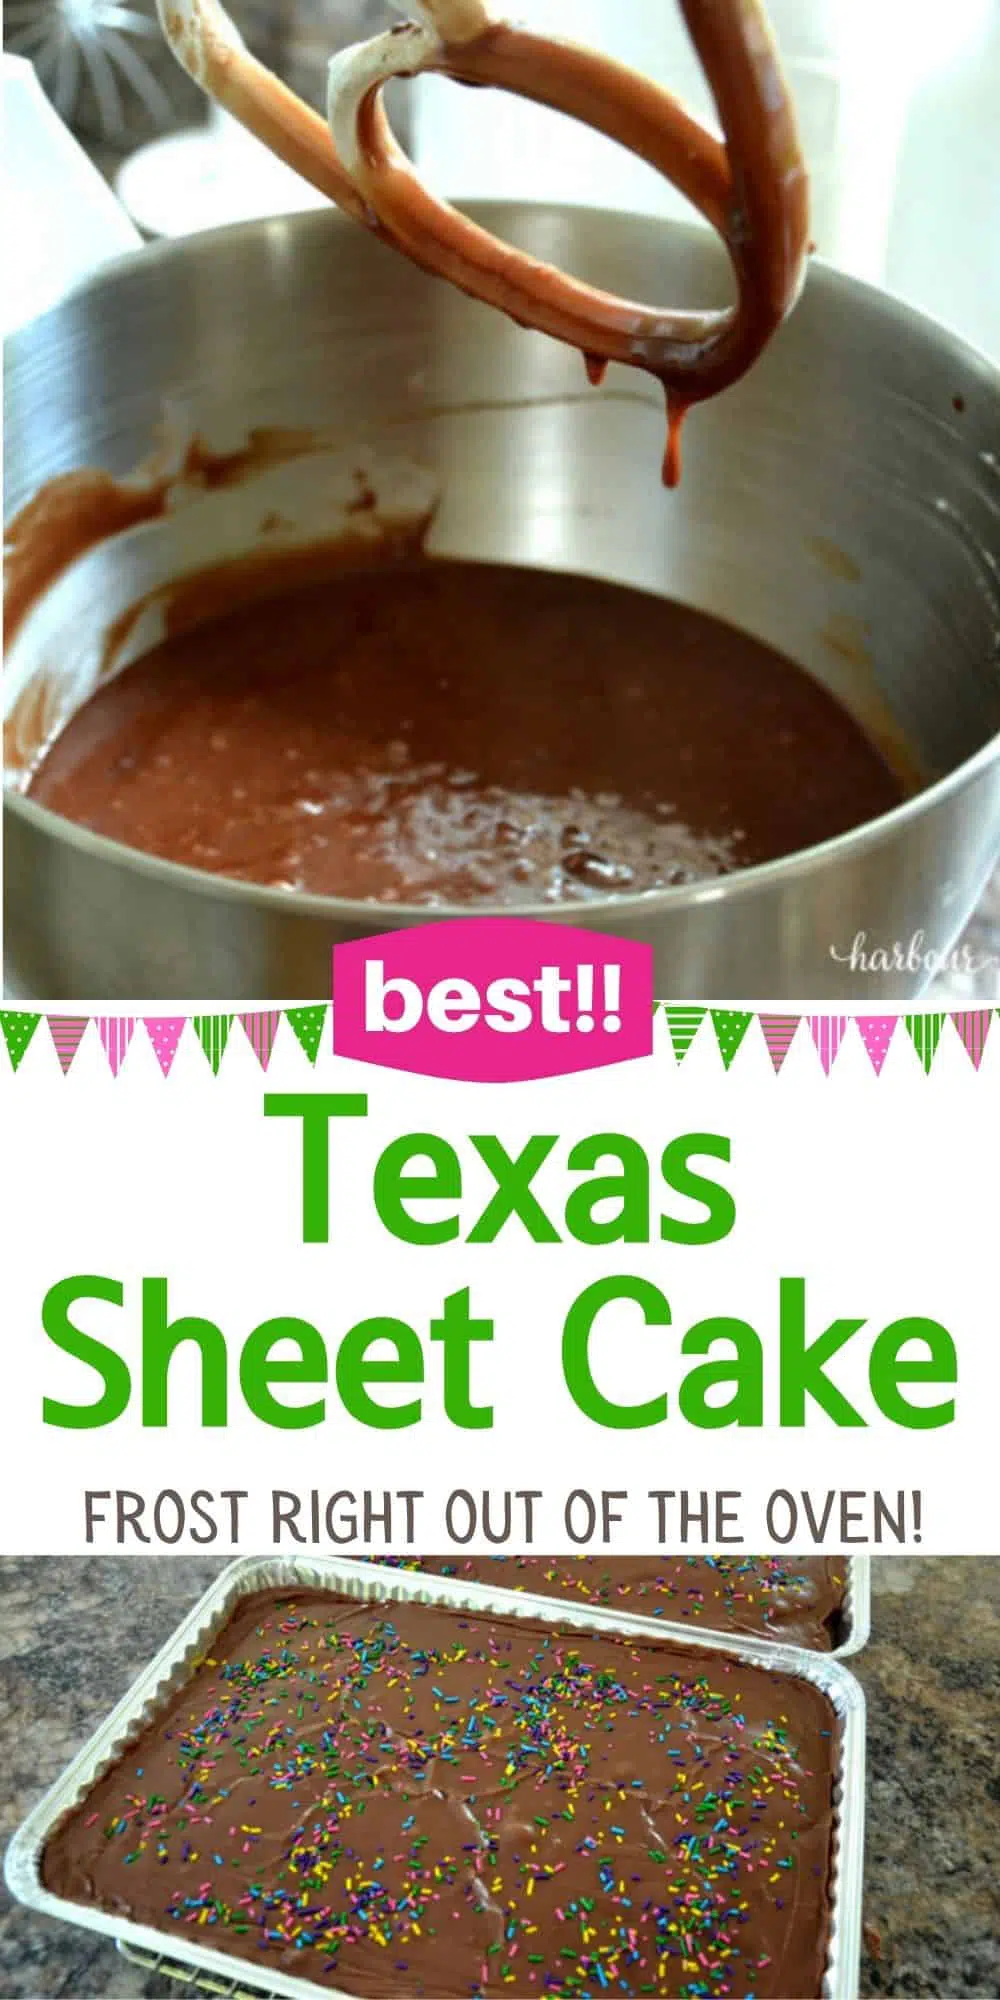 picture of Texas Sheet Cake with the text "best texas sheet cake" over it